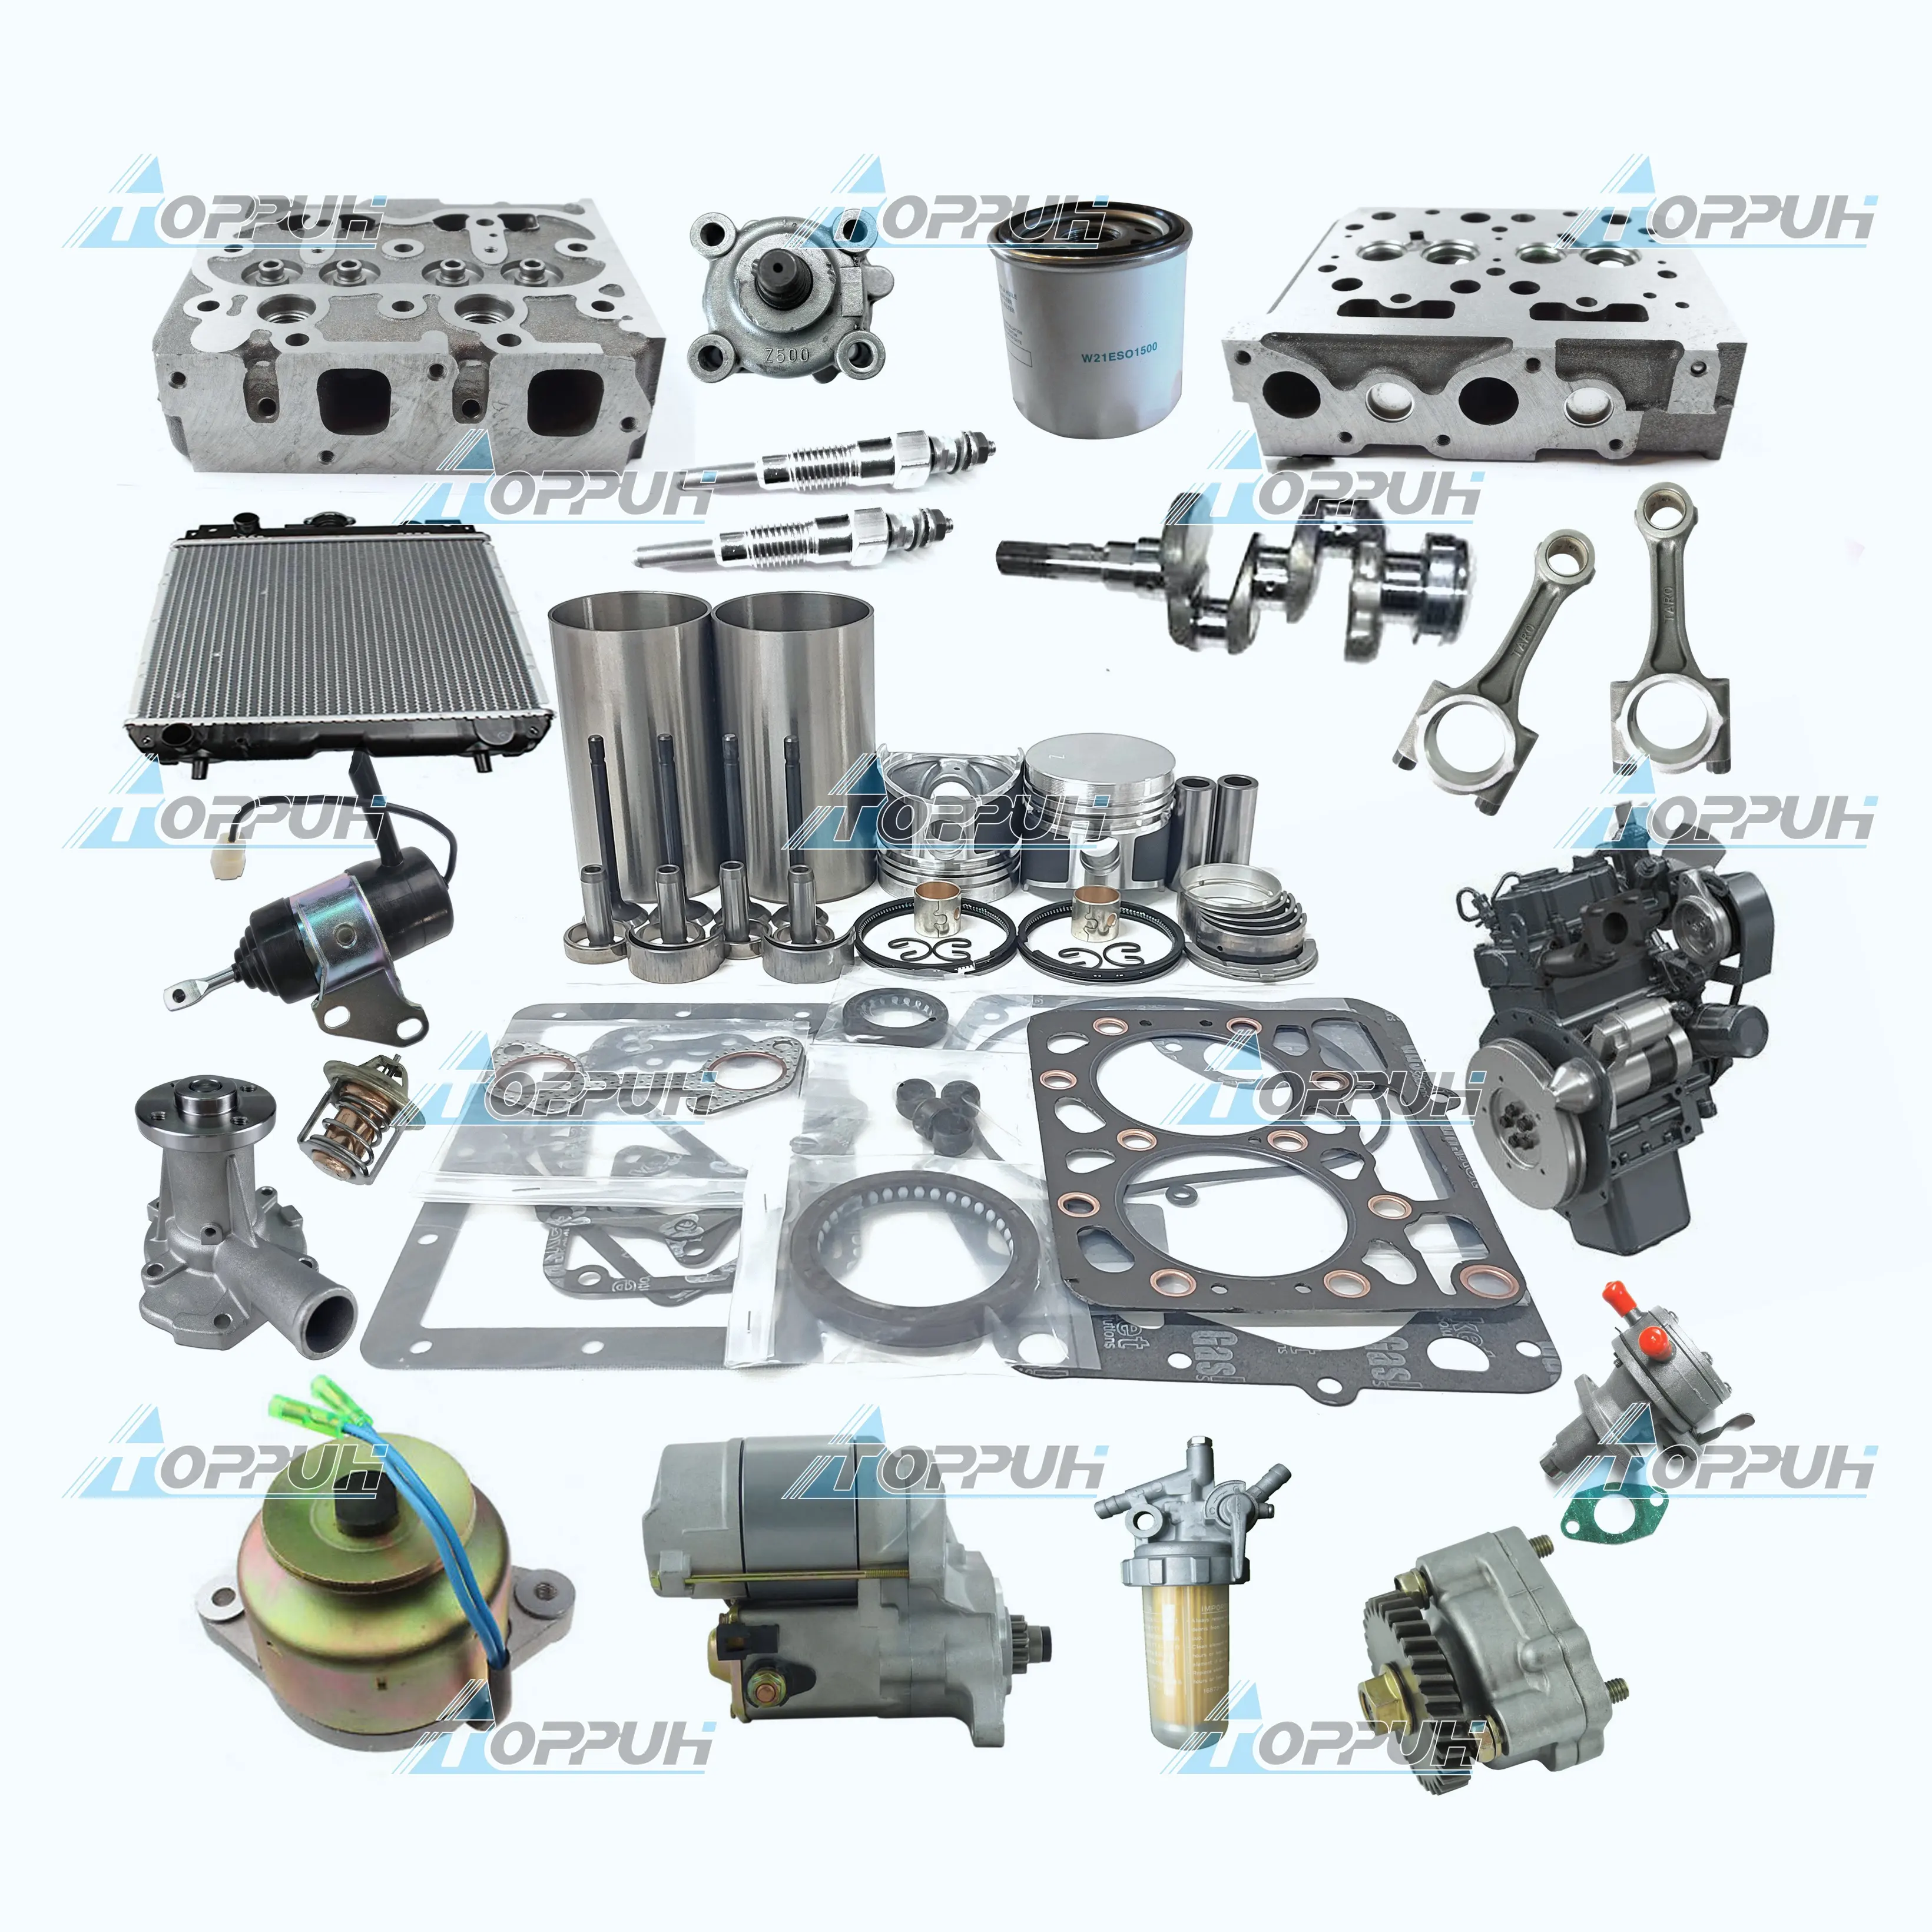 Machinery Engines Diesel Spare Parts for Kubota Z400 Z402 Z430 Z482 Z483 Z500 Z600 Z602 Z650 Z750 Z751 Z851 2 Cylinder Engine